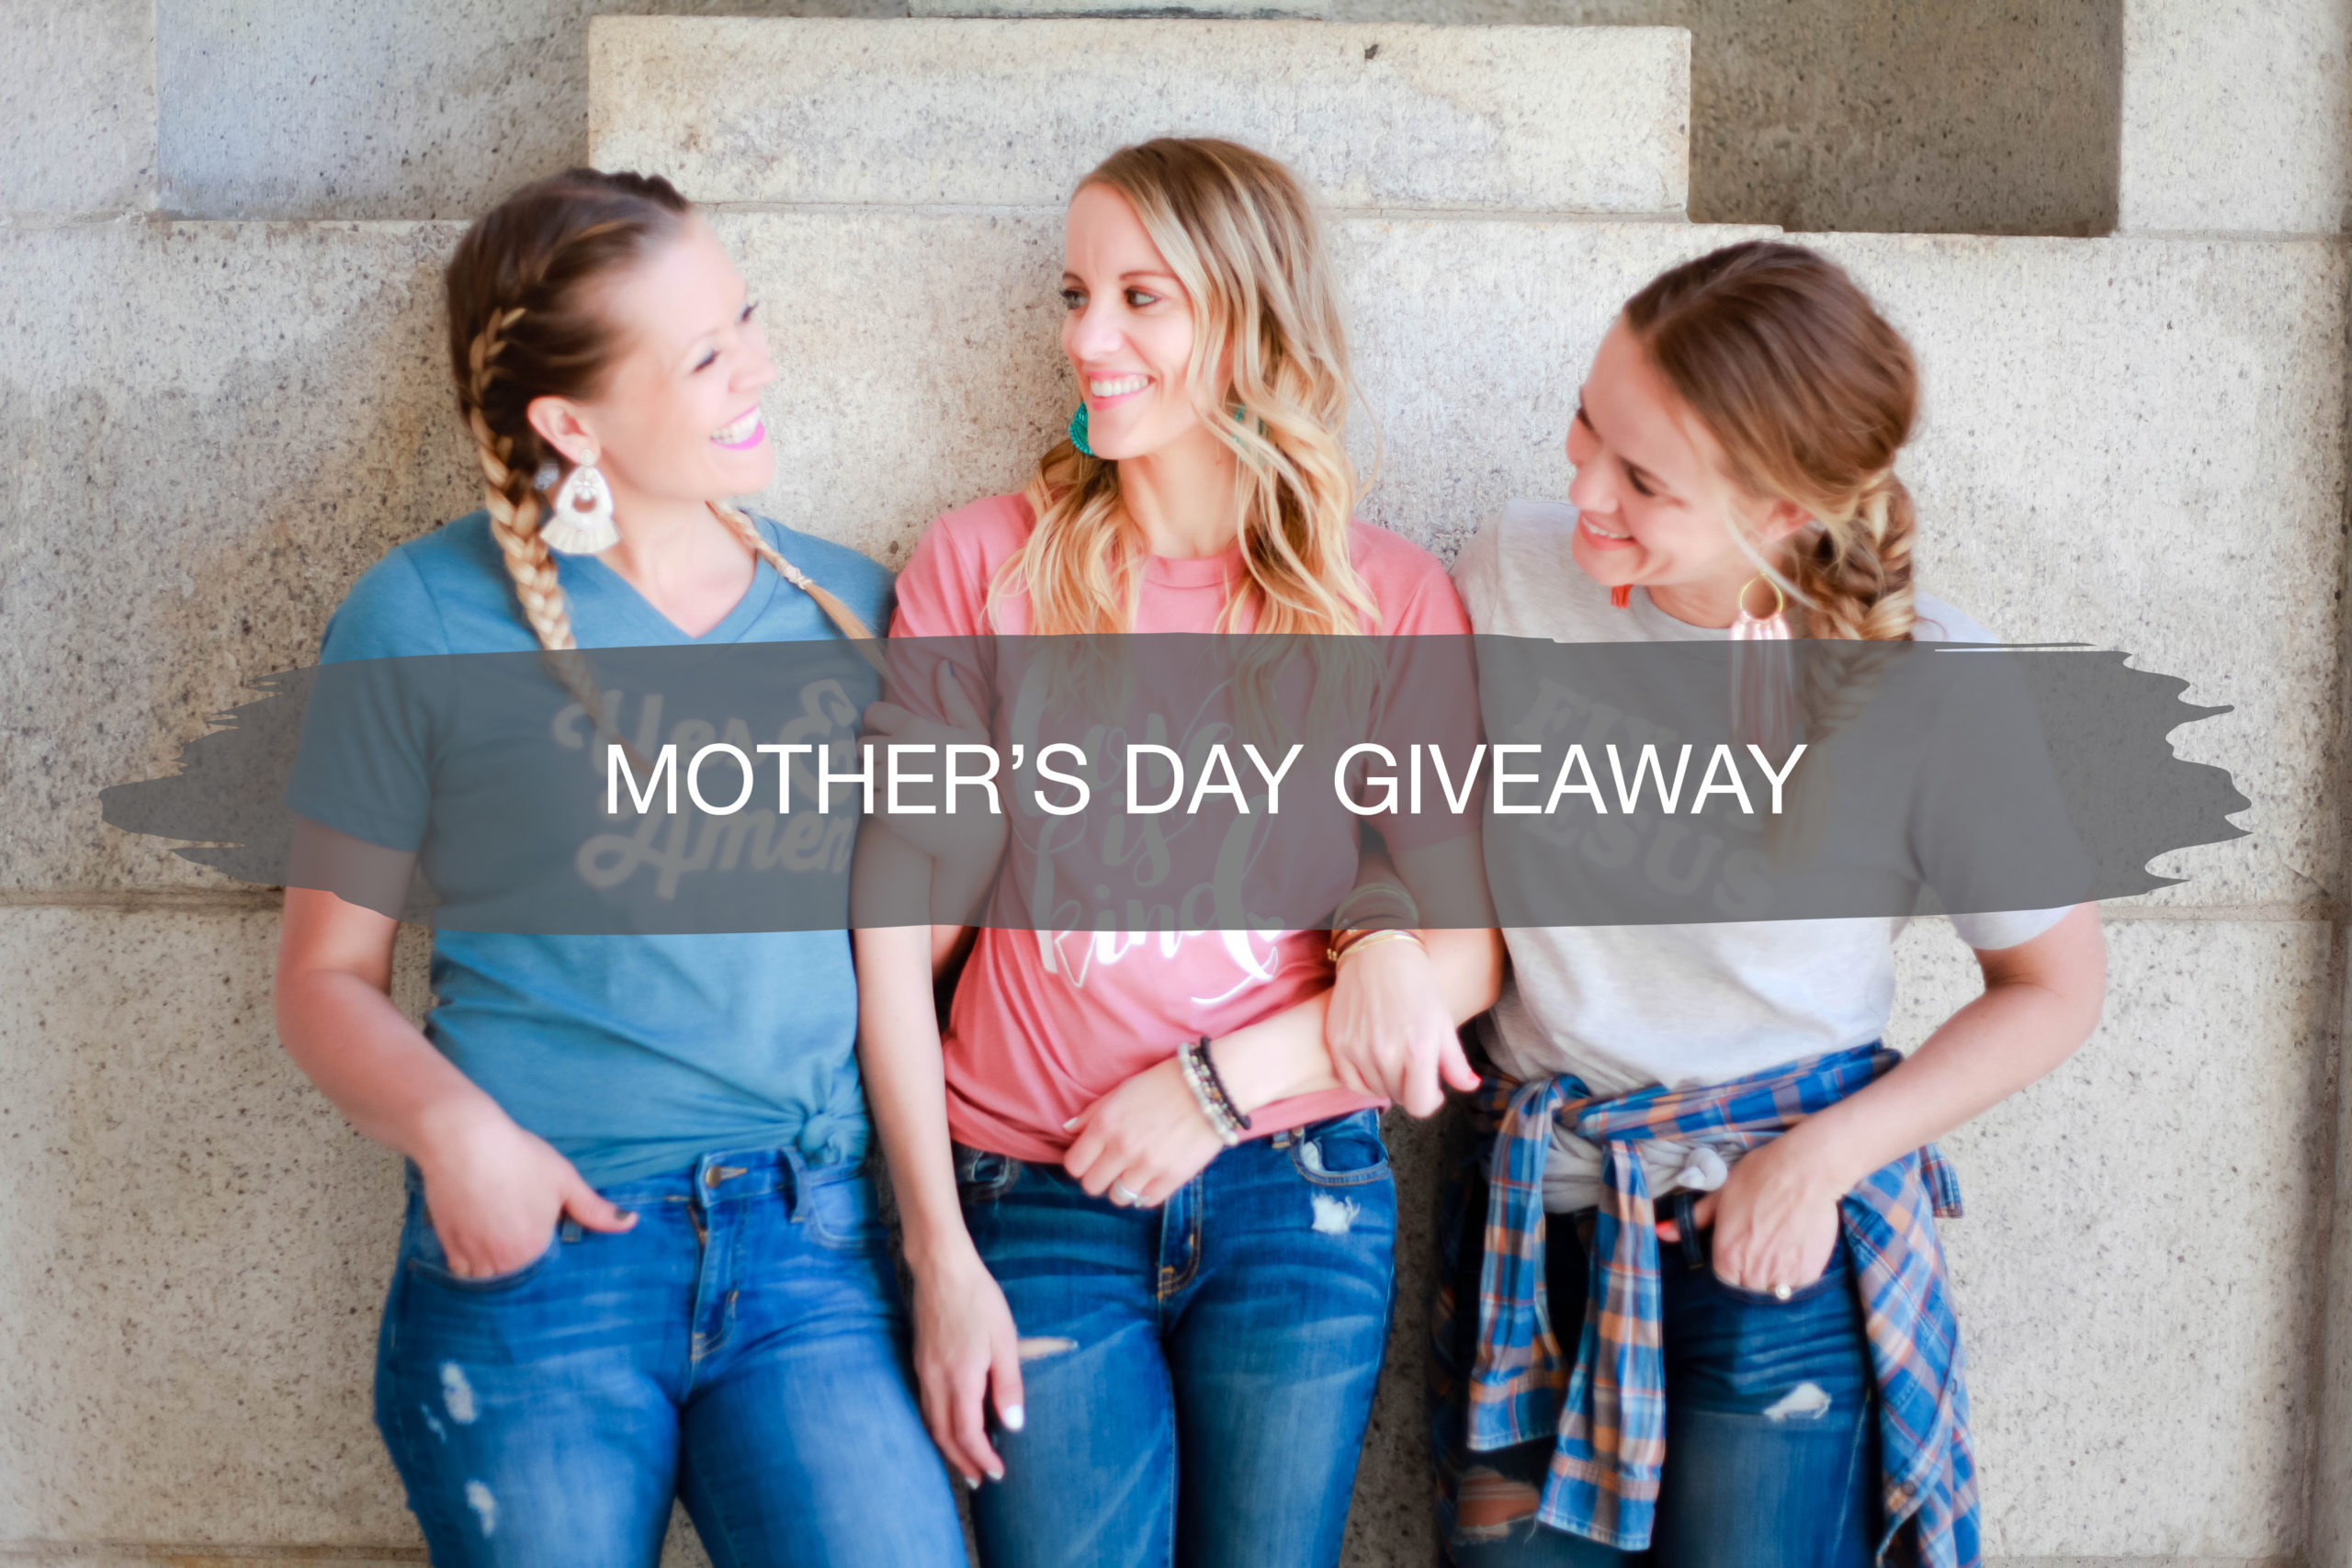 mother's day giveaway | construction2style